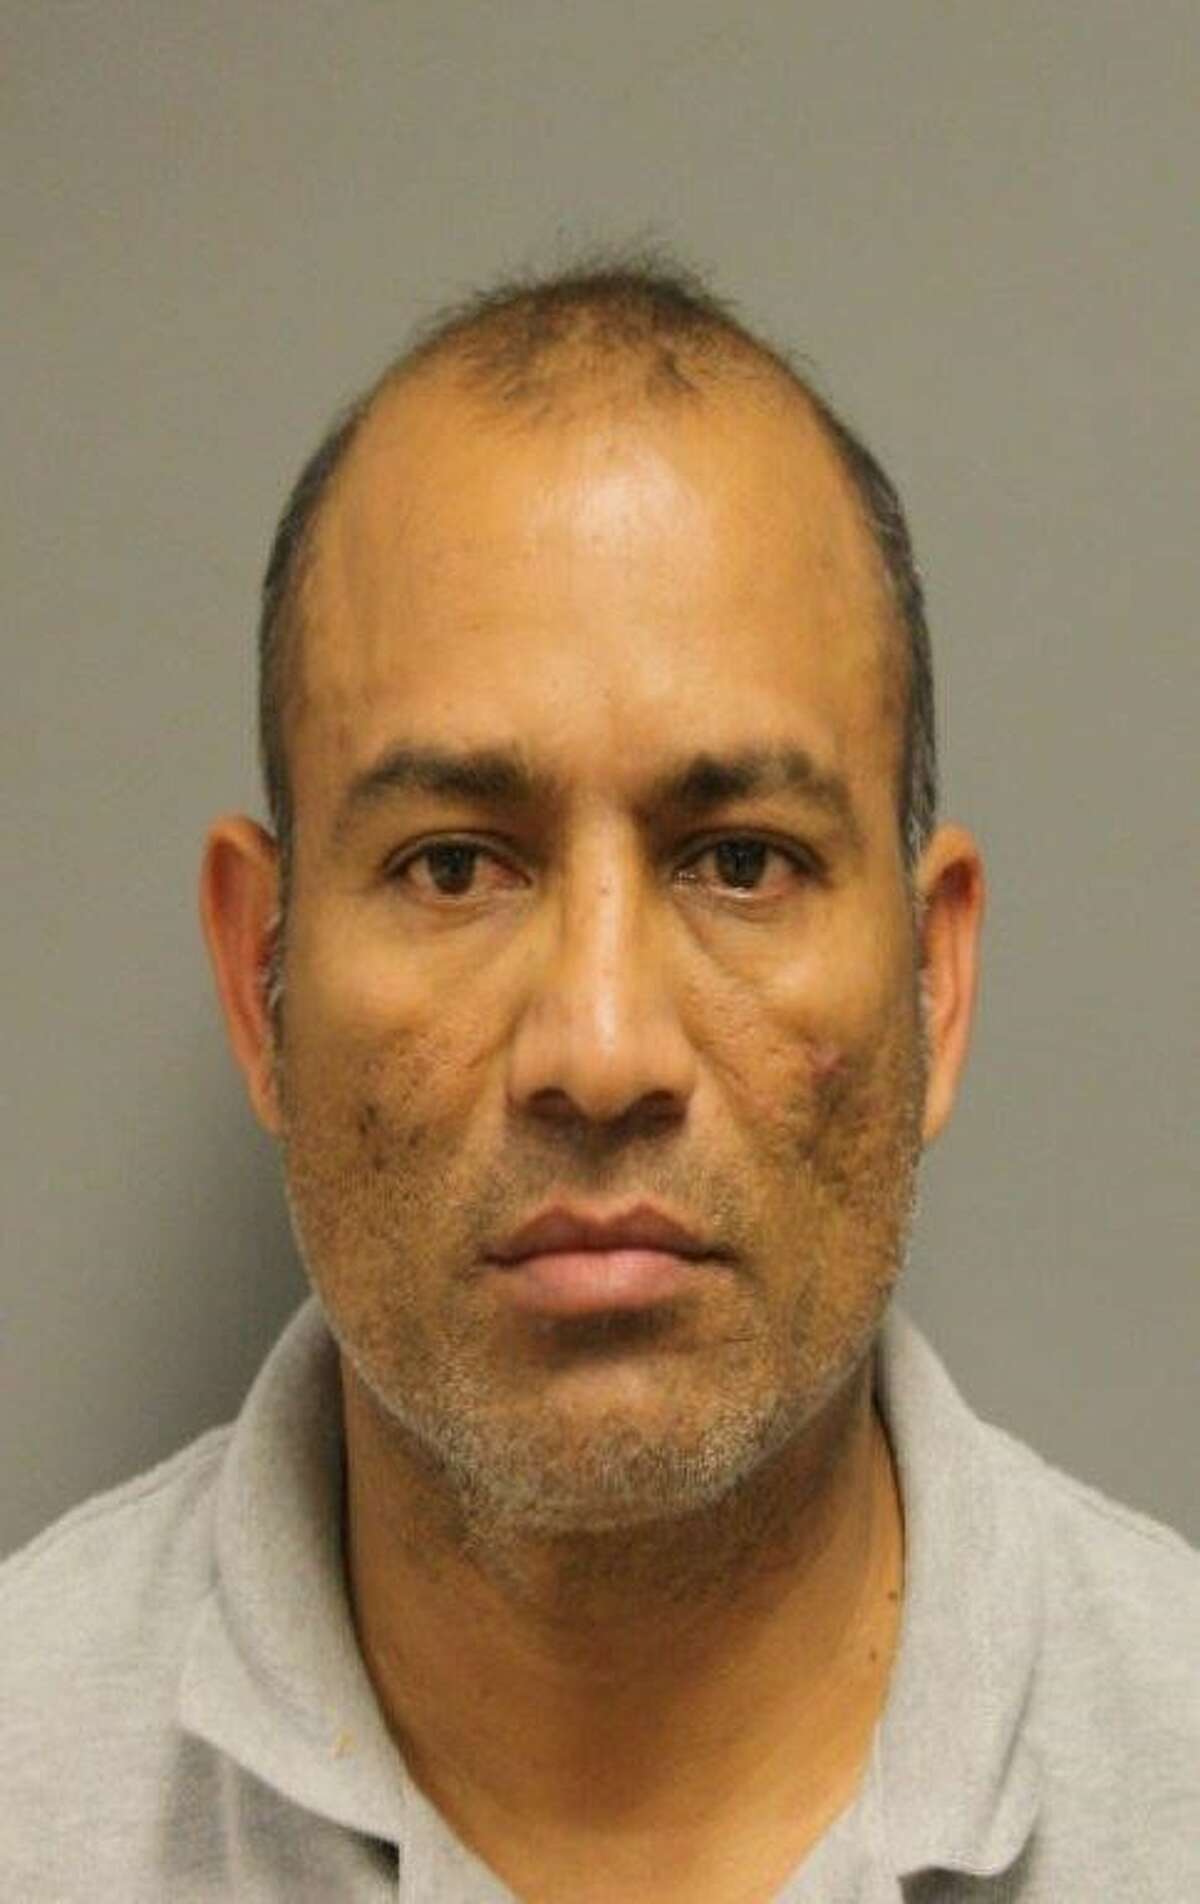 Jose Arquimides Granados, 46, is wanted by Crime Stoppers of Houston as of Aug. 20, 2015 on a charge of indecency with a child. Authorities say that on February 2, 2014, Jose, a maintenance man at an apartment complex, inappropriately touched a 15 year old girl while completing a maintenance work order. He touched her on the outside of her shorts and shirt and cornered her in a room.